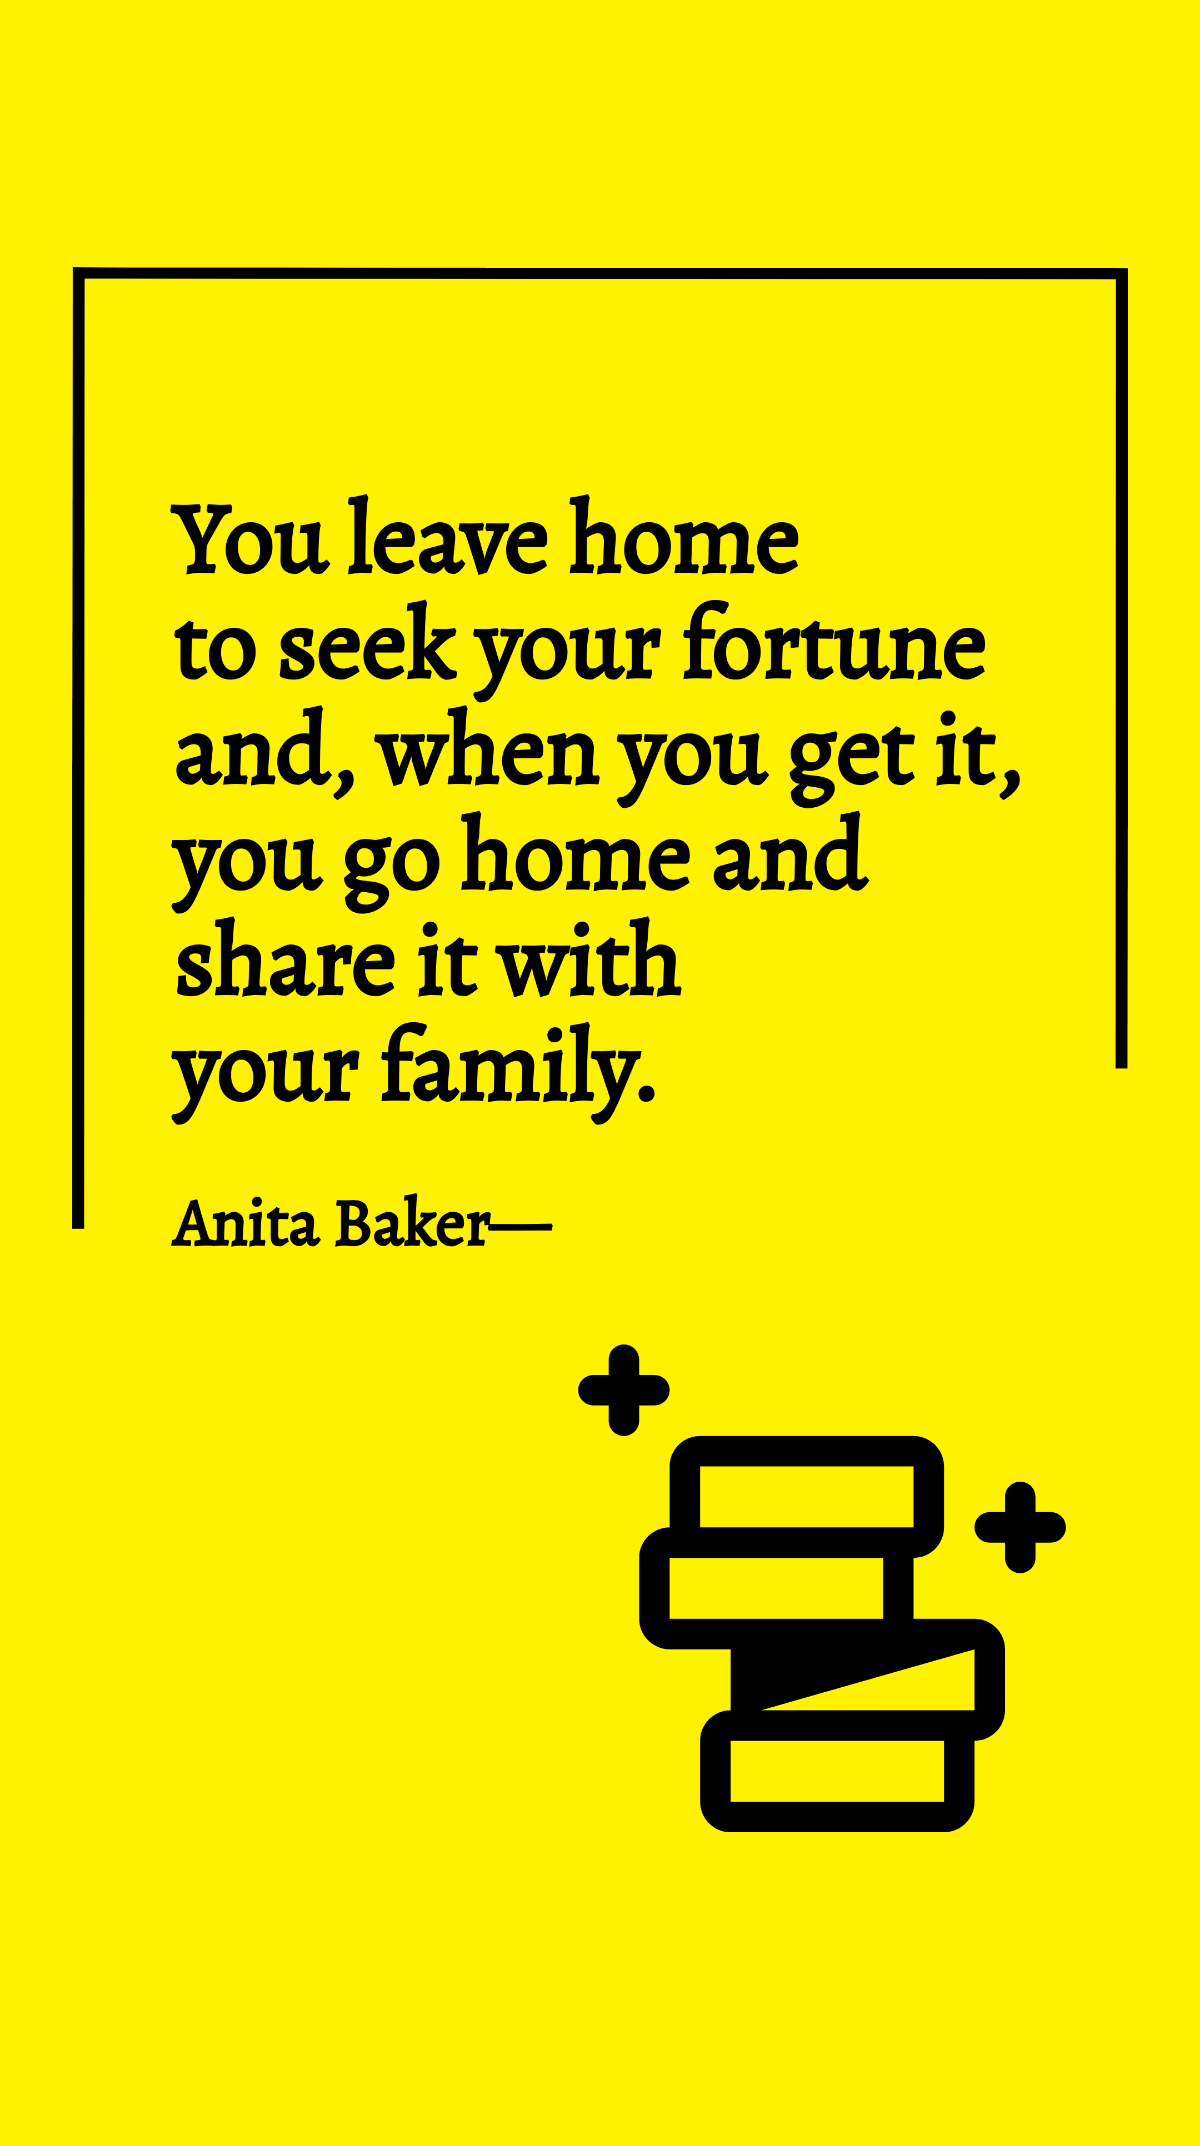 Anita Baker - You leave home to seek your fortune and, when you get it, you go home and share it with your family.